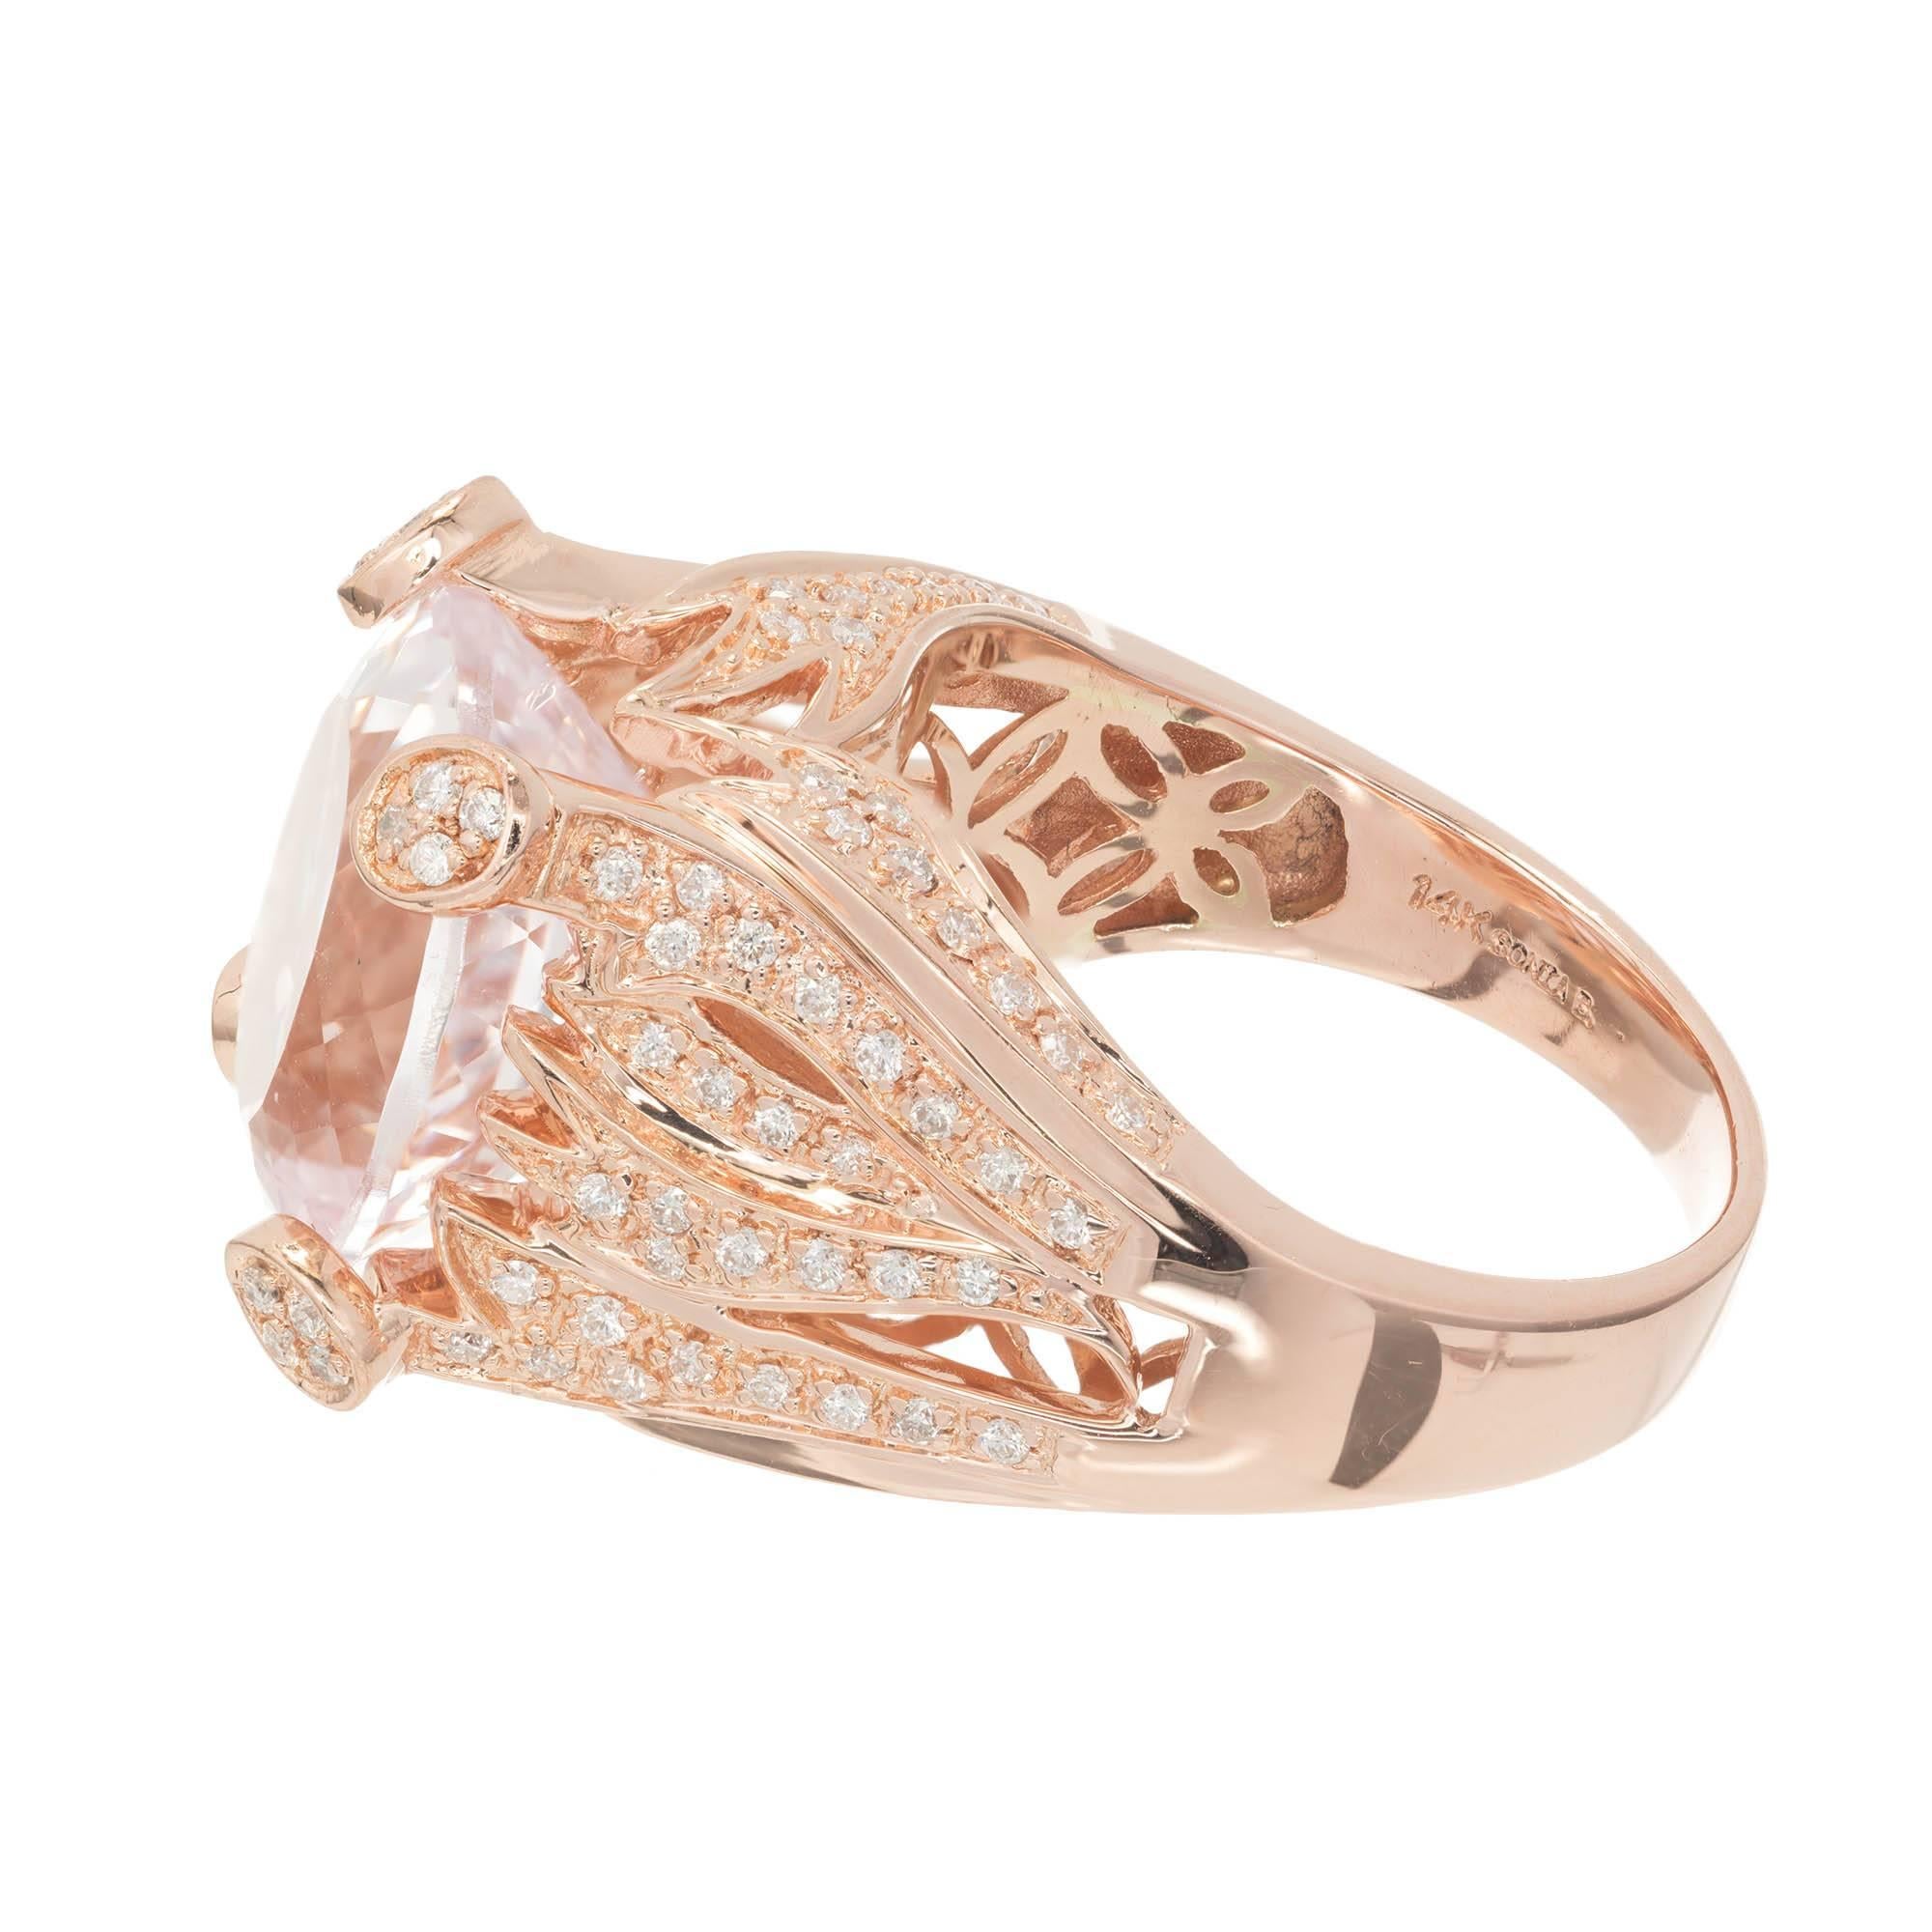 Sonia B 8.00 Carat Pink Kunzite Diamond Rose Gold Cocktail Ring In Good Condition For Sale In Stamford, CT